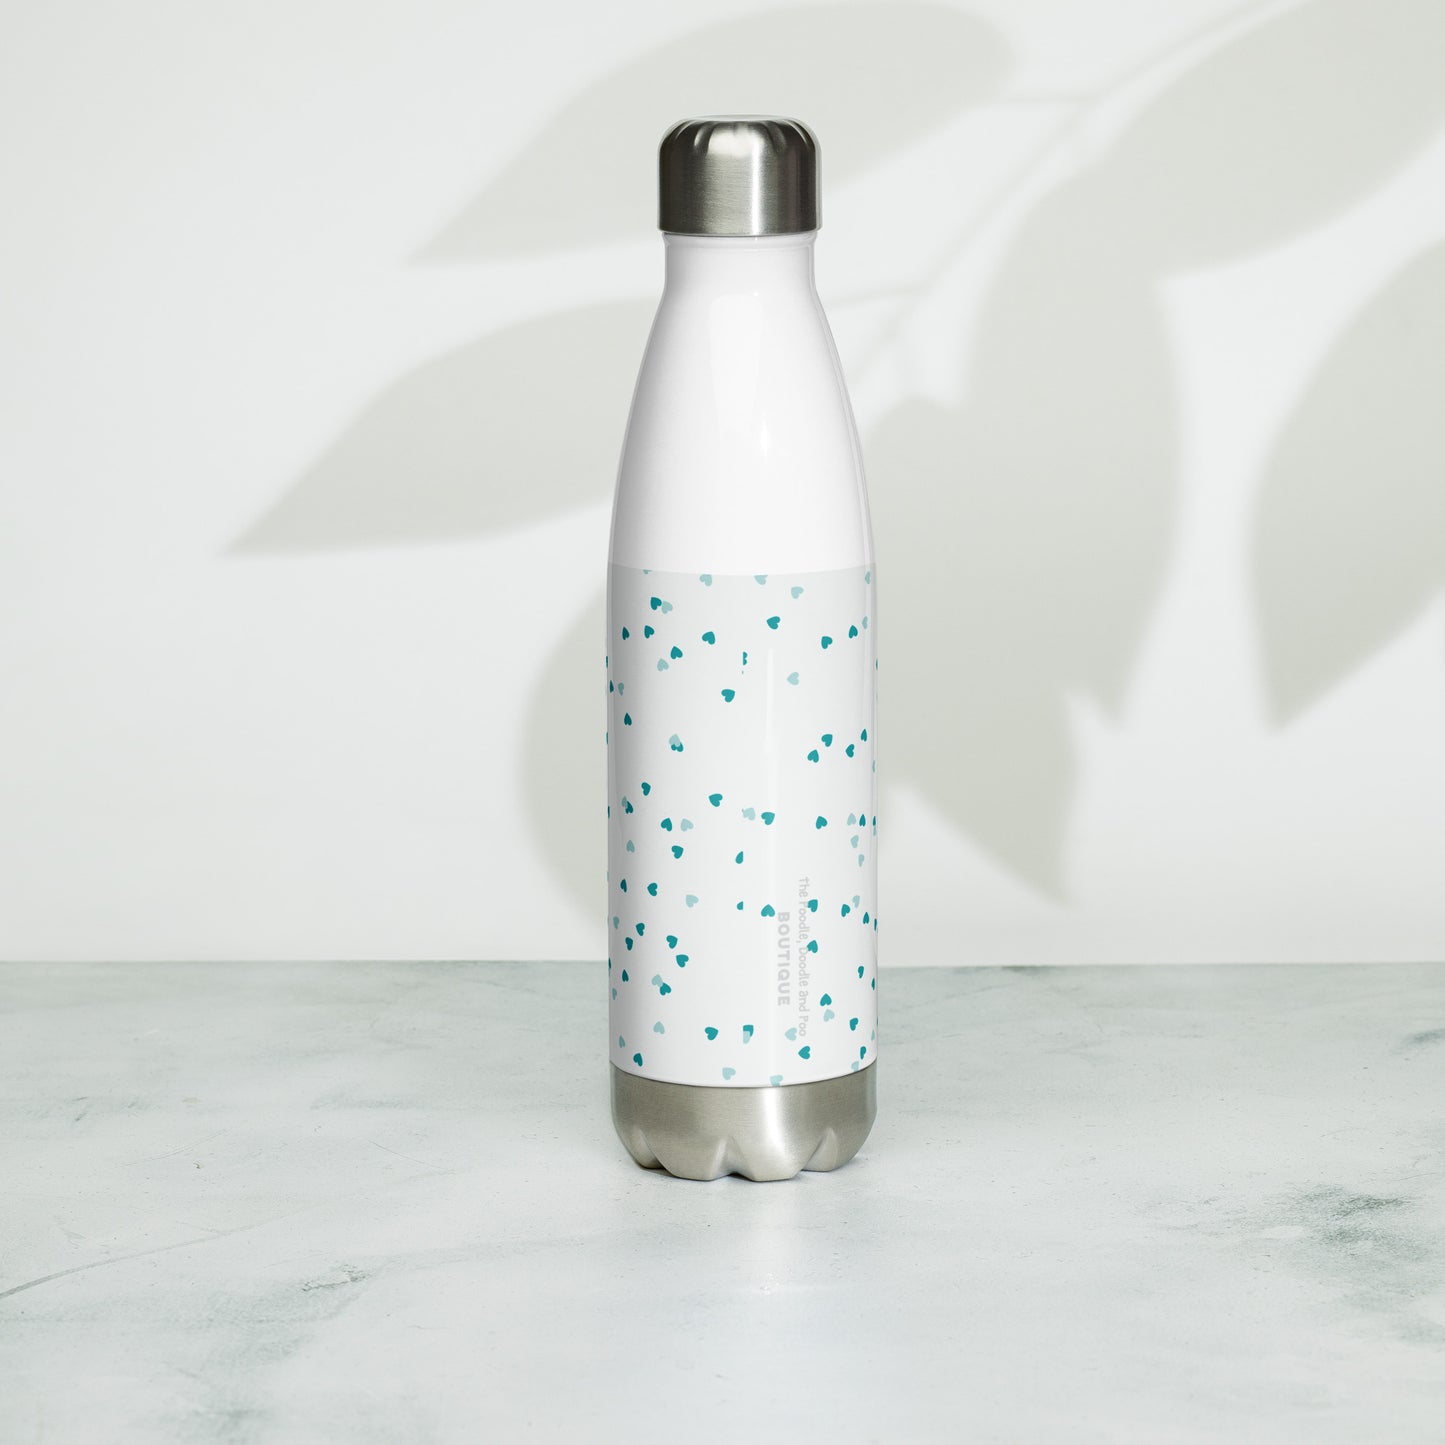 "Love" Stainless steel water bottle - red Cockapoo